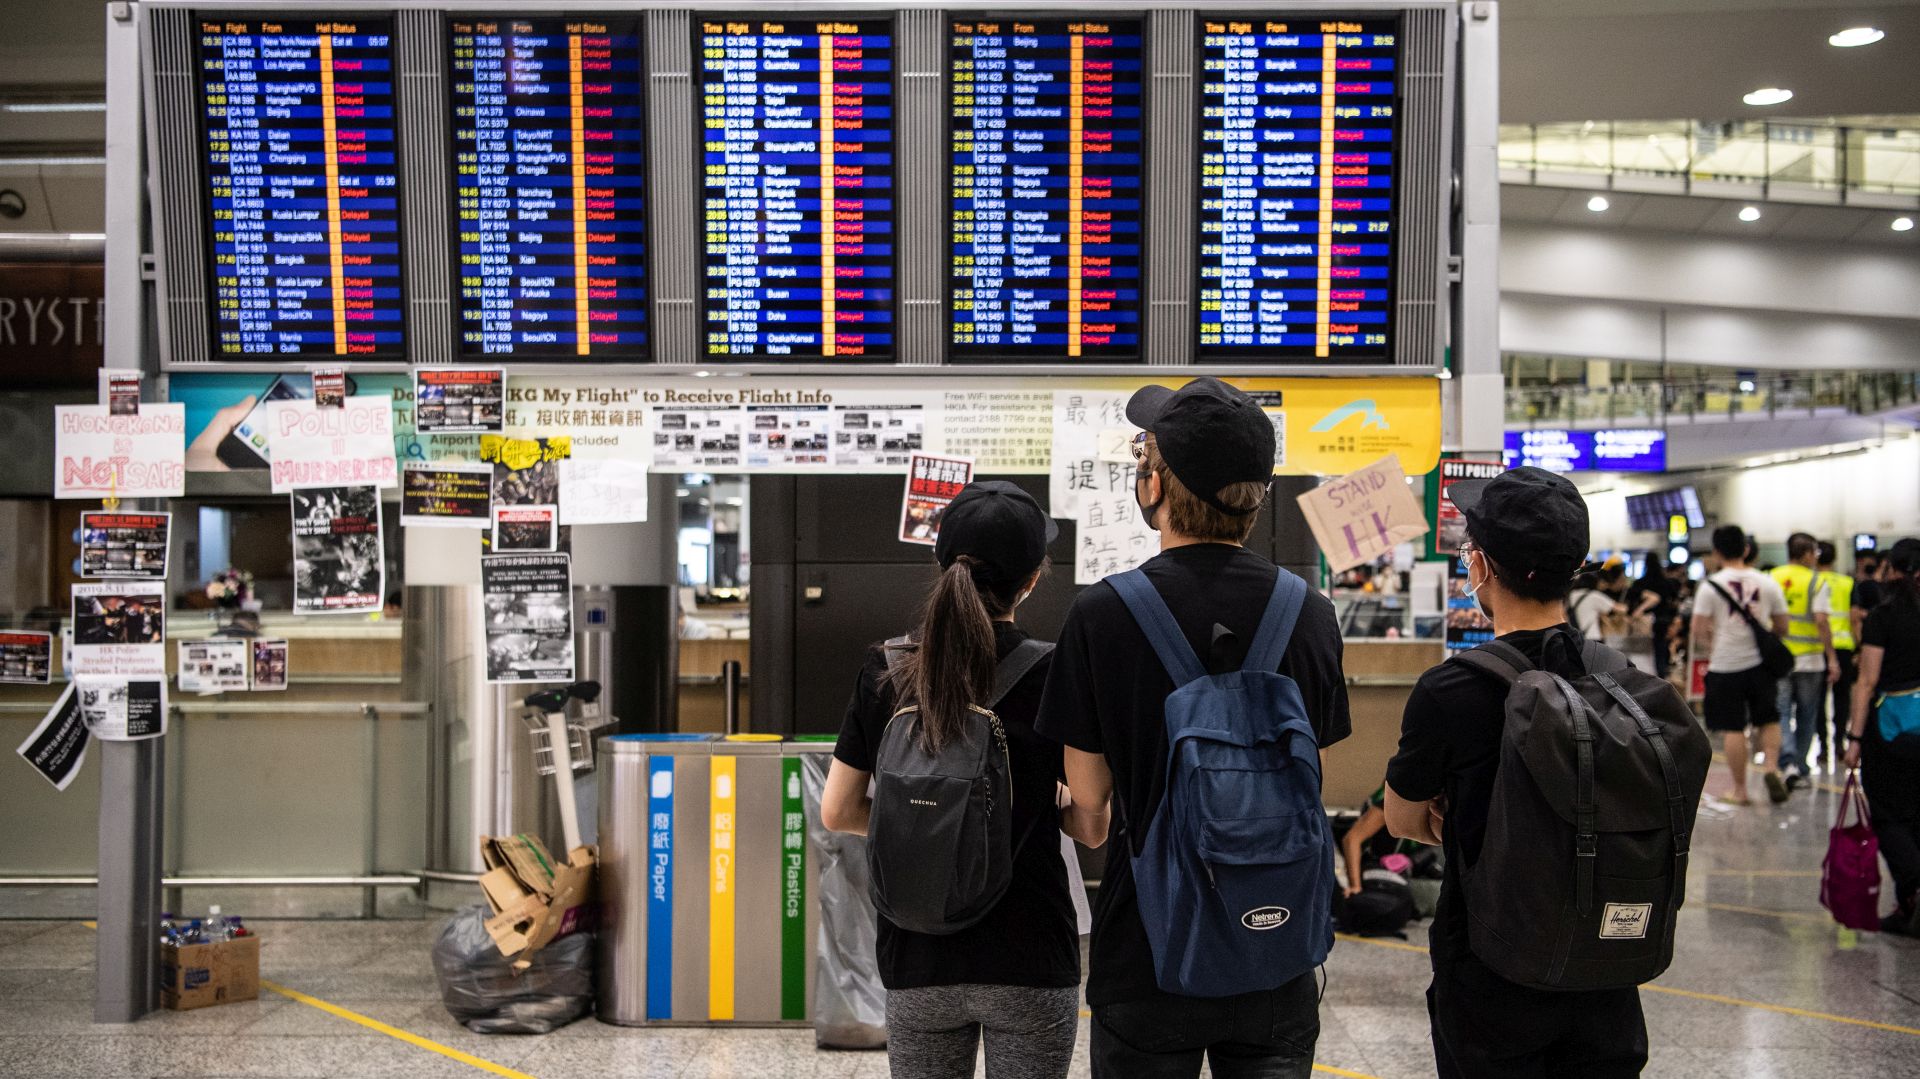 epa07770186 Protesters stand in front of a flight display board showing cancelled flights as they occupy Hong Kong Chek Lap Kok International Airport in Hong Kong, China, 12 August 2019. According to media reports, the Airport Authority said it is virtually shutting down the airport, one of the busiest in the world, as thousands of protesters occupied both the arrival and departure halls of Chek Lap Kok. Hong Kong has been gripped for weeks by mass protests, which began in June 2019 over a now-suspended extradition bill to China and have developed into an anti-government movement.  EPA/LAUREL CHOR